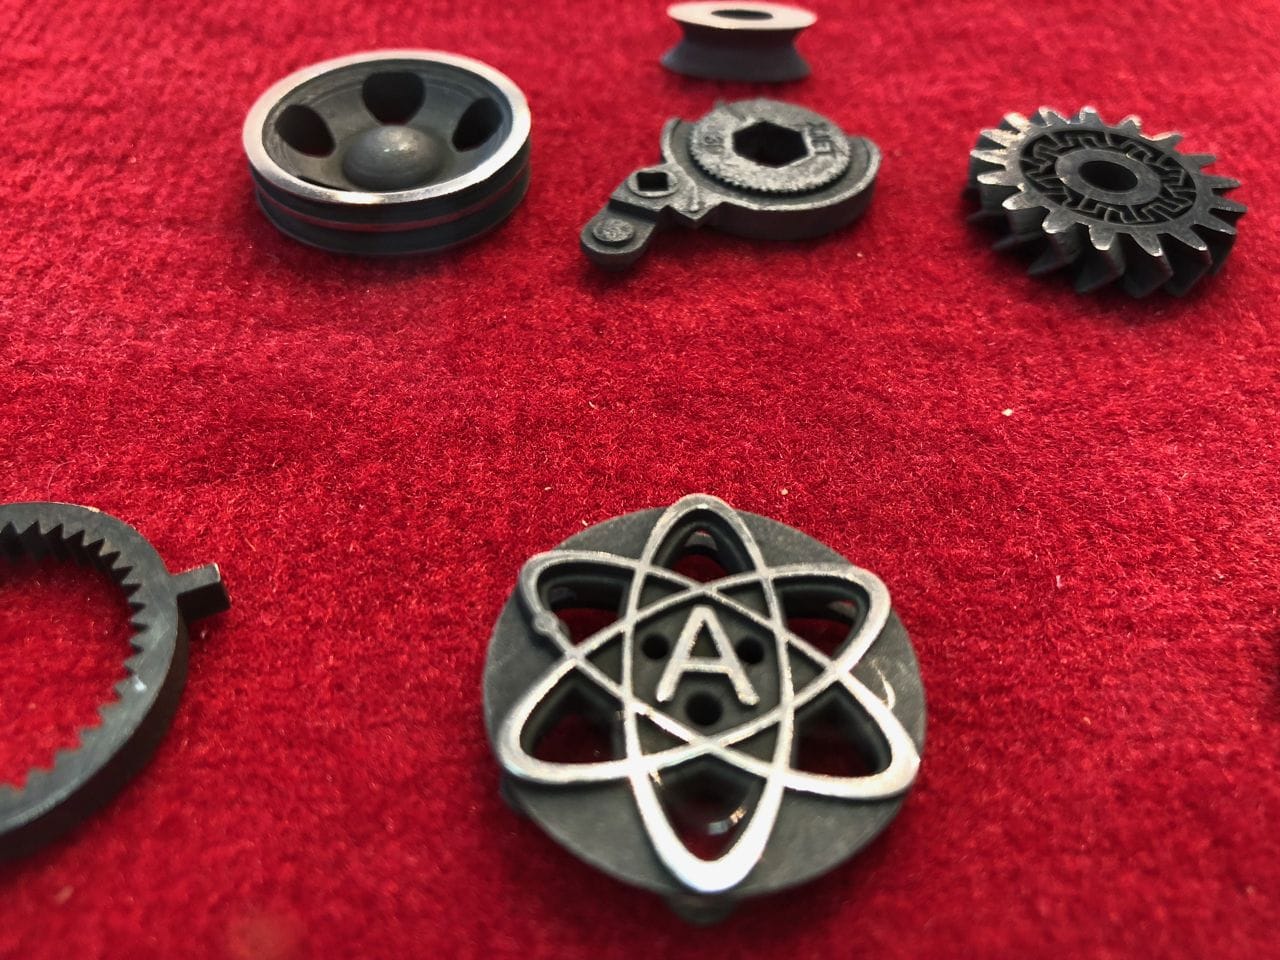  Metal 3D prints made with BASF's metal-infused filament 